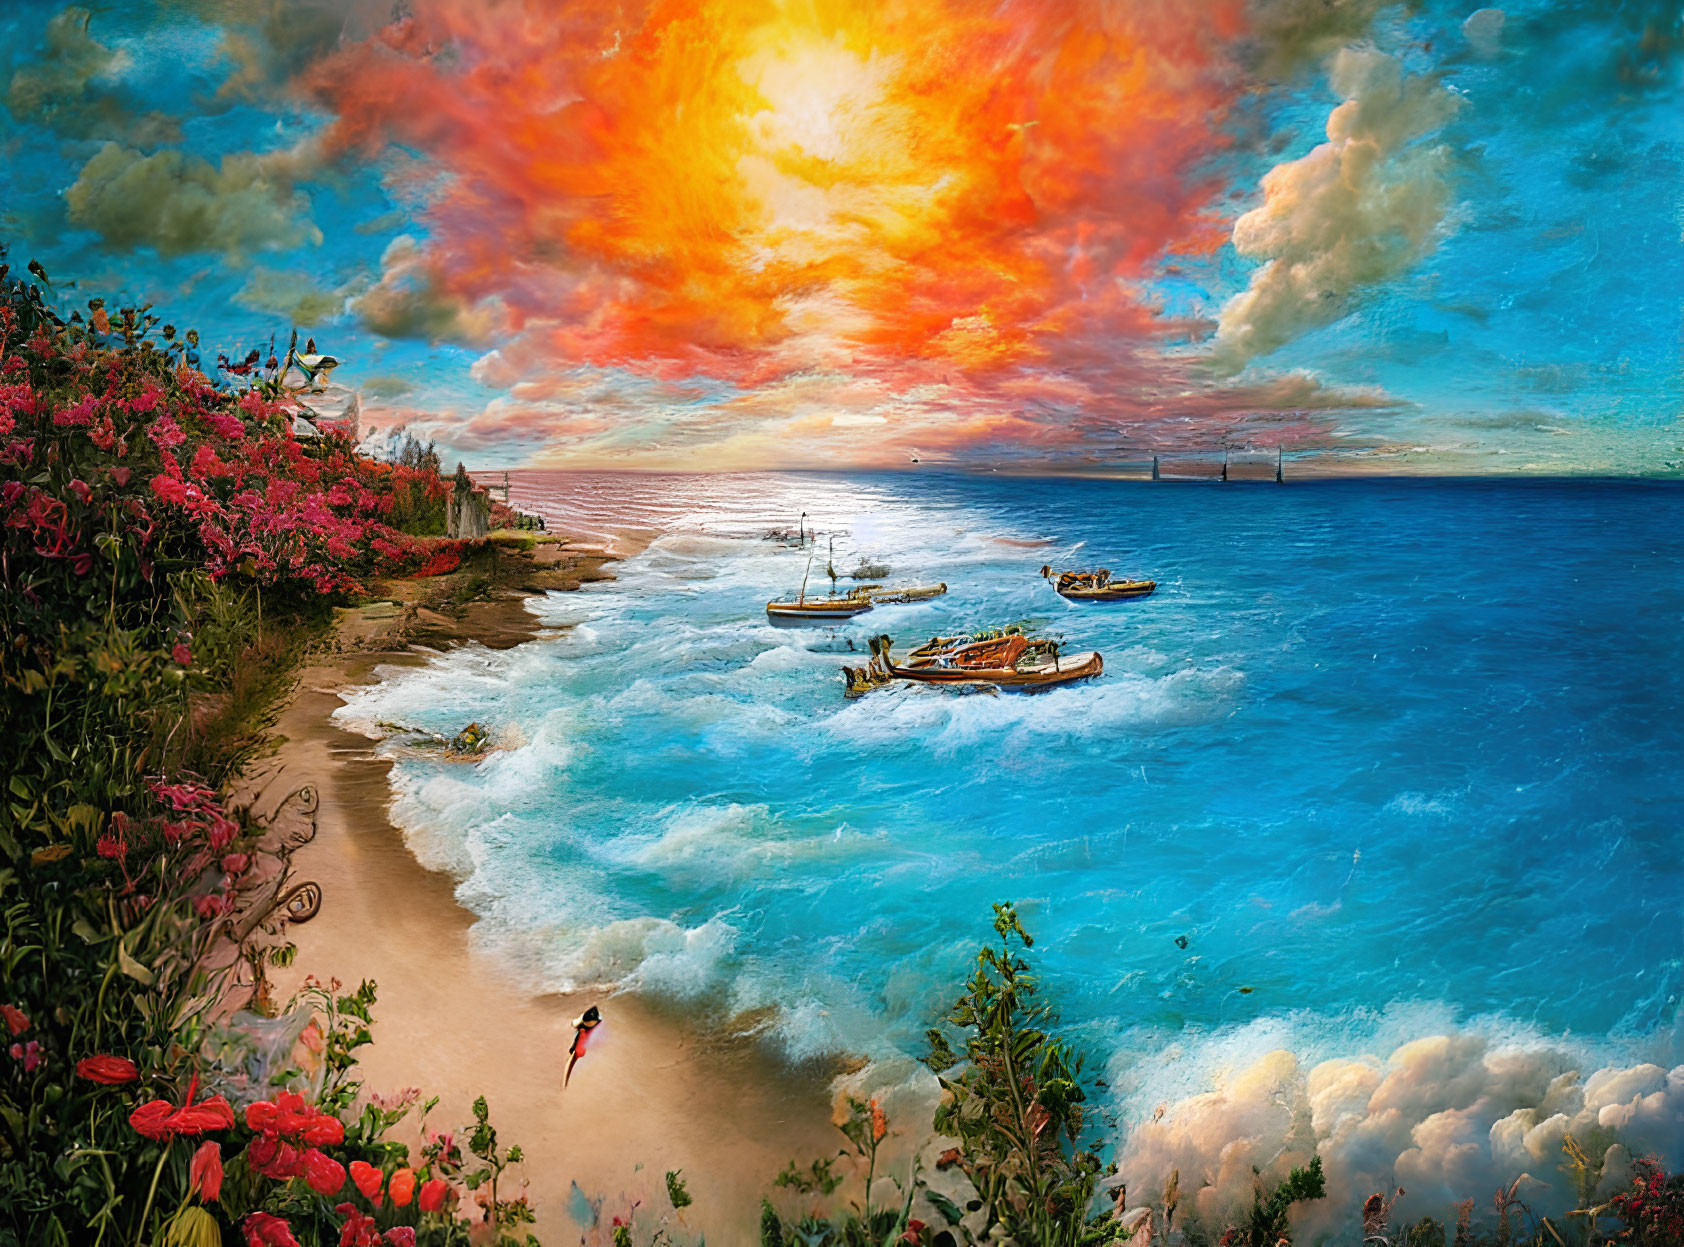 Colorful Beach Sunset with Walking Figure, Boats, Clouds, and Floral Foliage